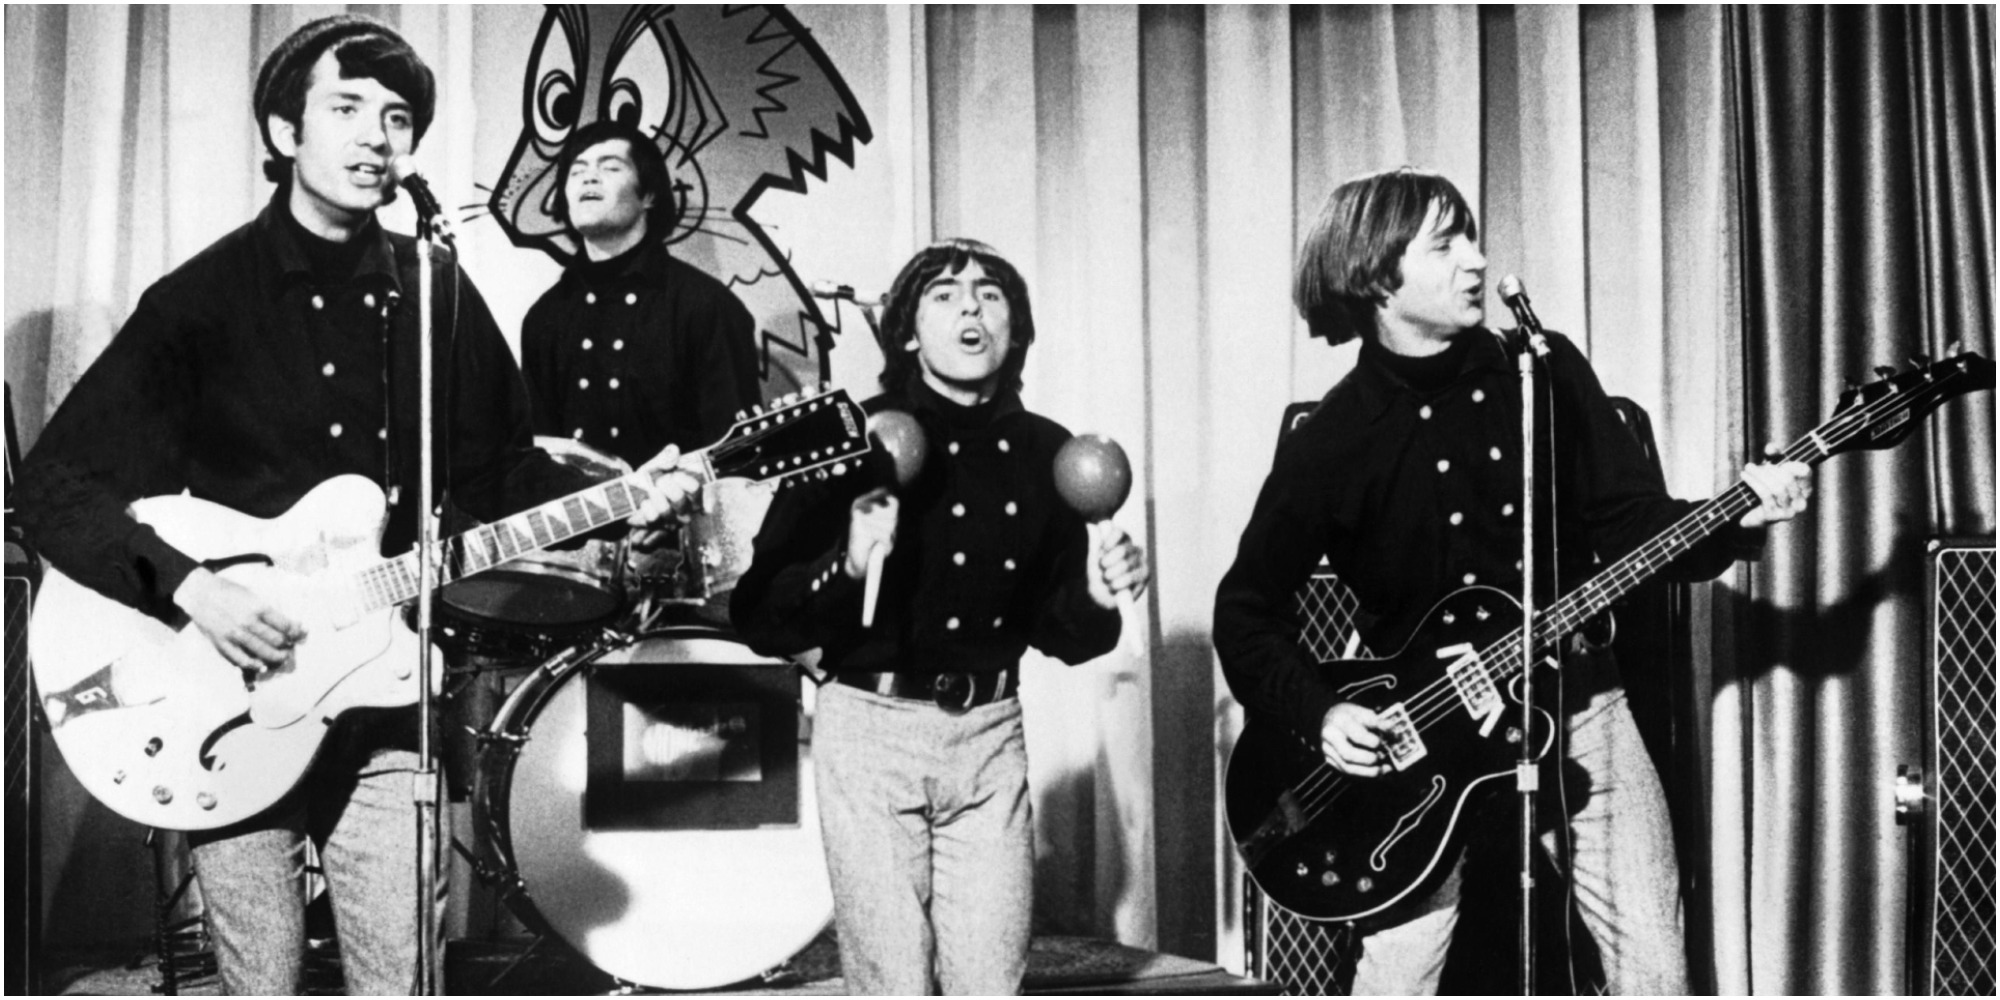 The Monkees perform on the set of their television show in 1967.